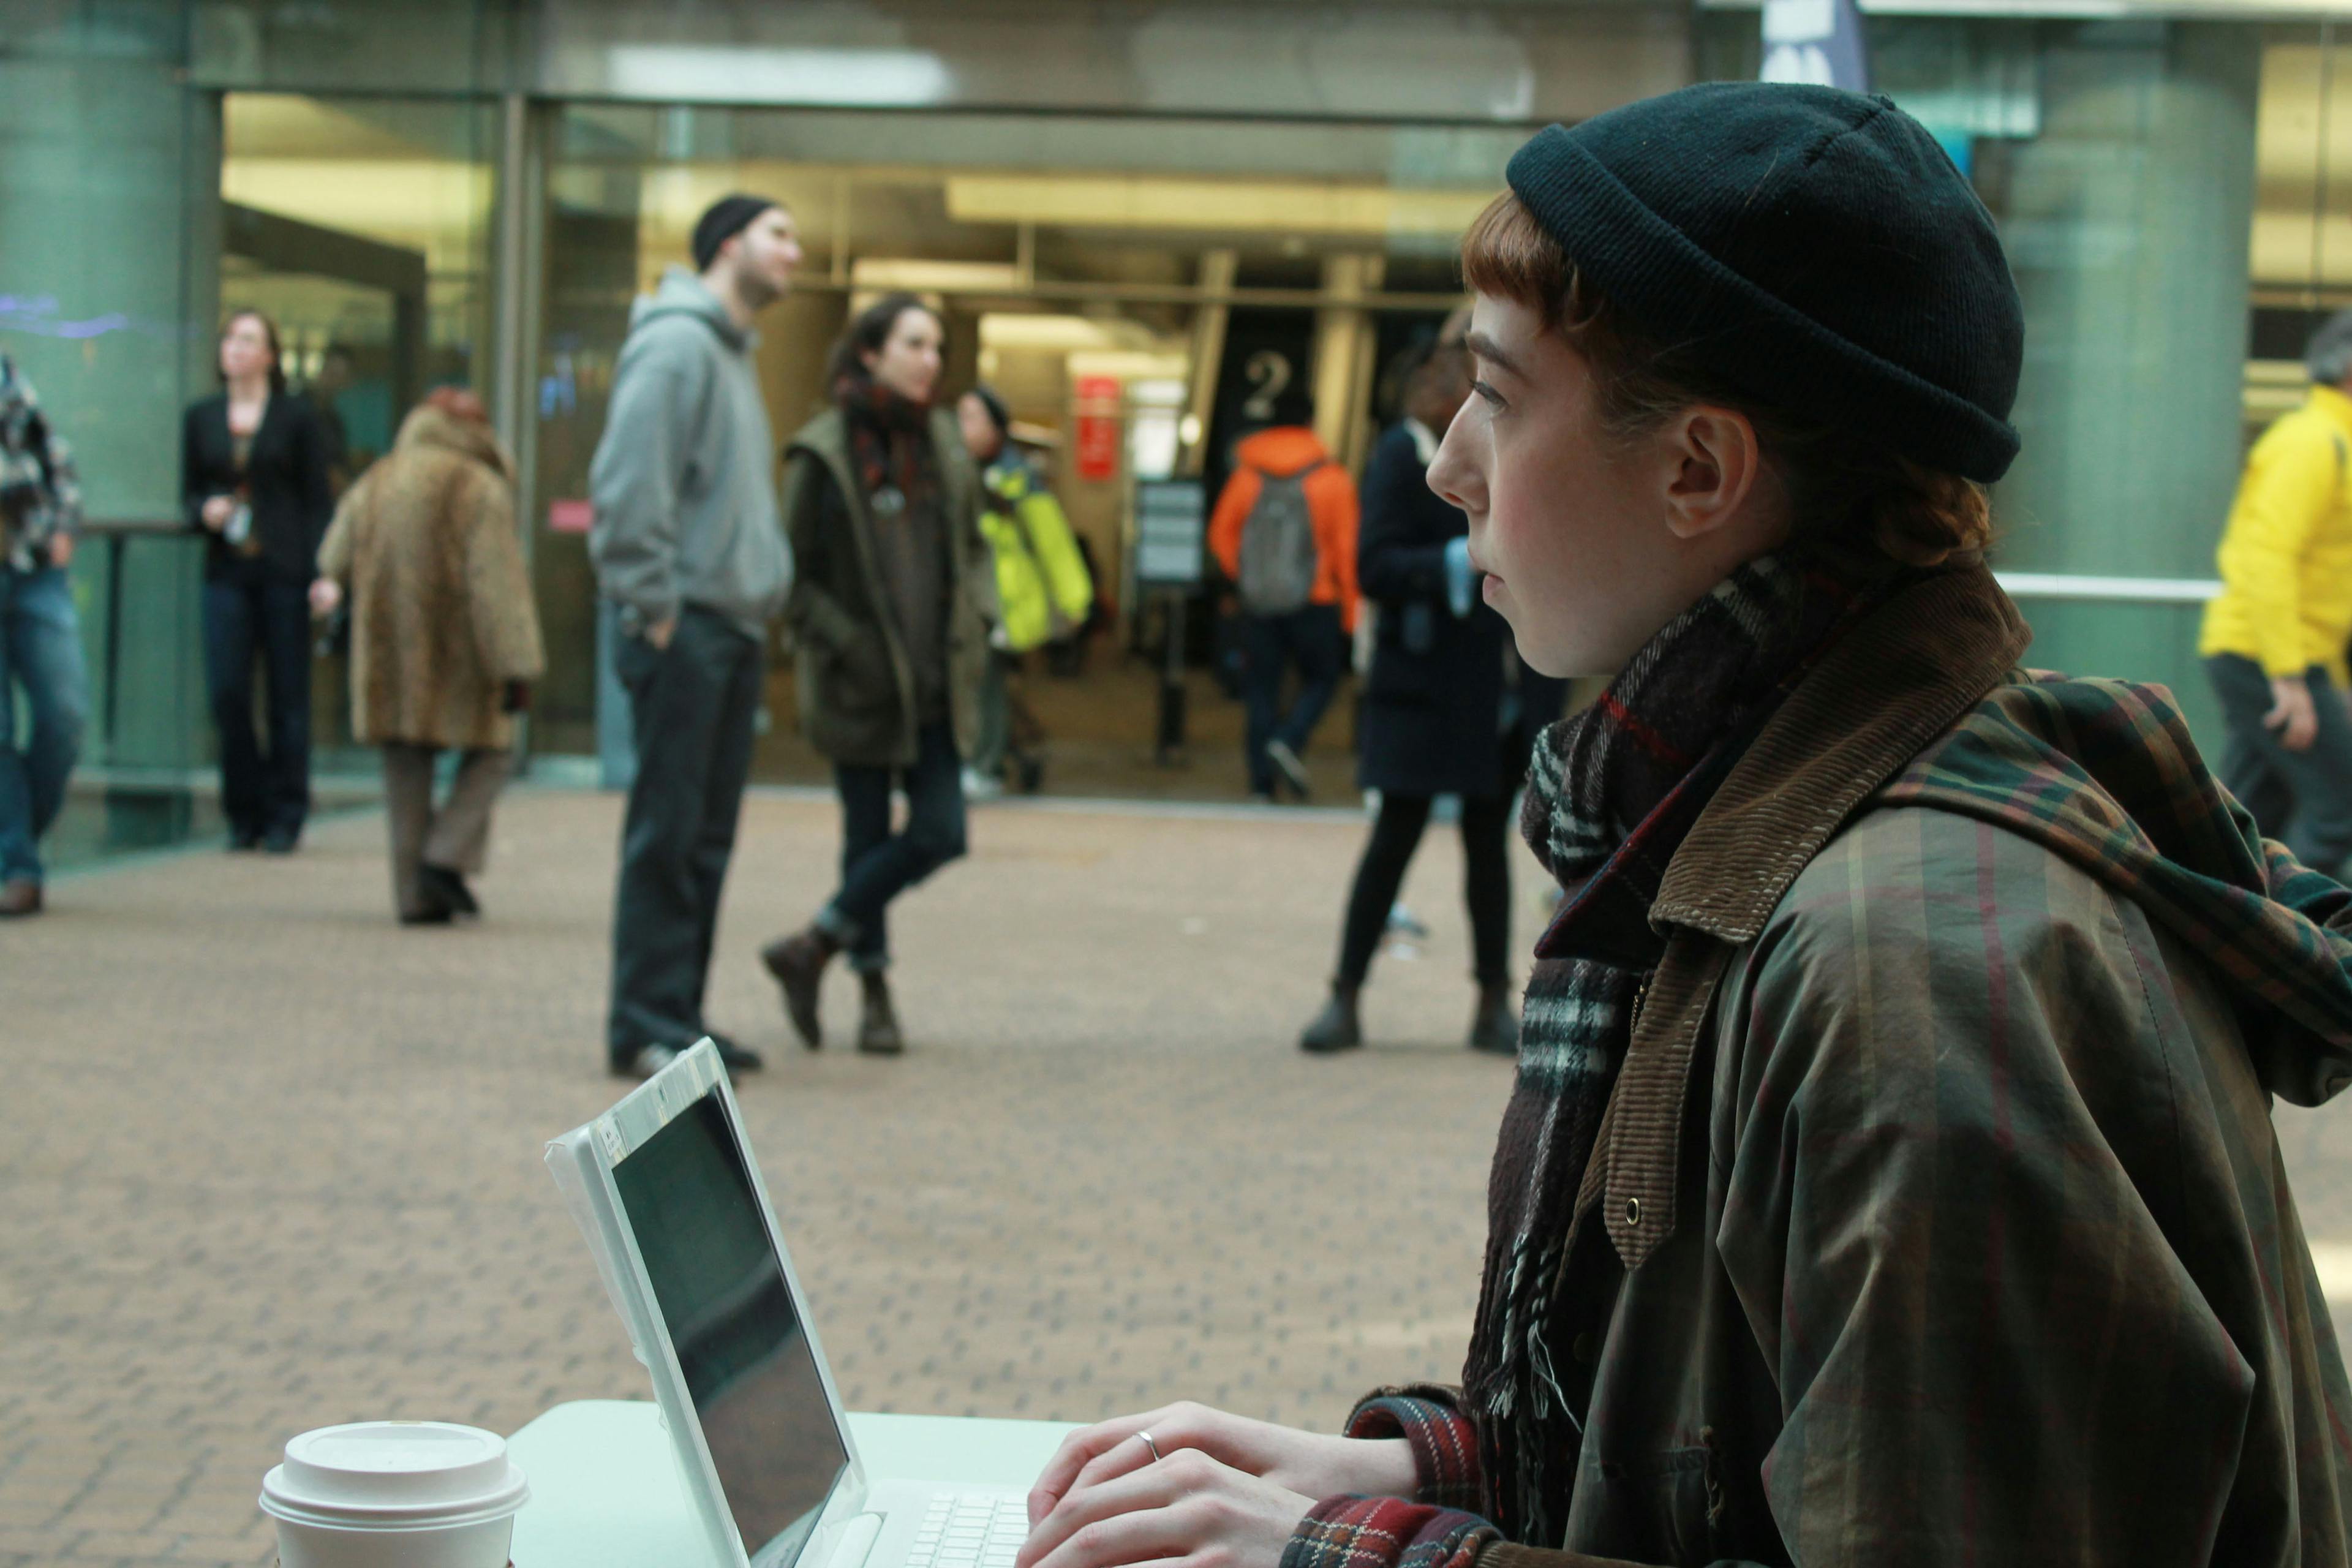 A person sits at a white desk outside an entrance to a public building. A white laptop sits on the desk. The person looks out at people entering and exiting while typing on the laptop.